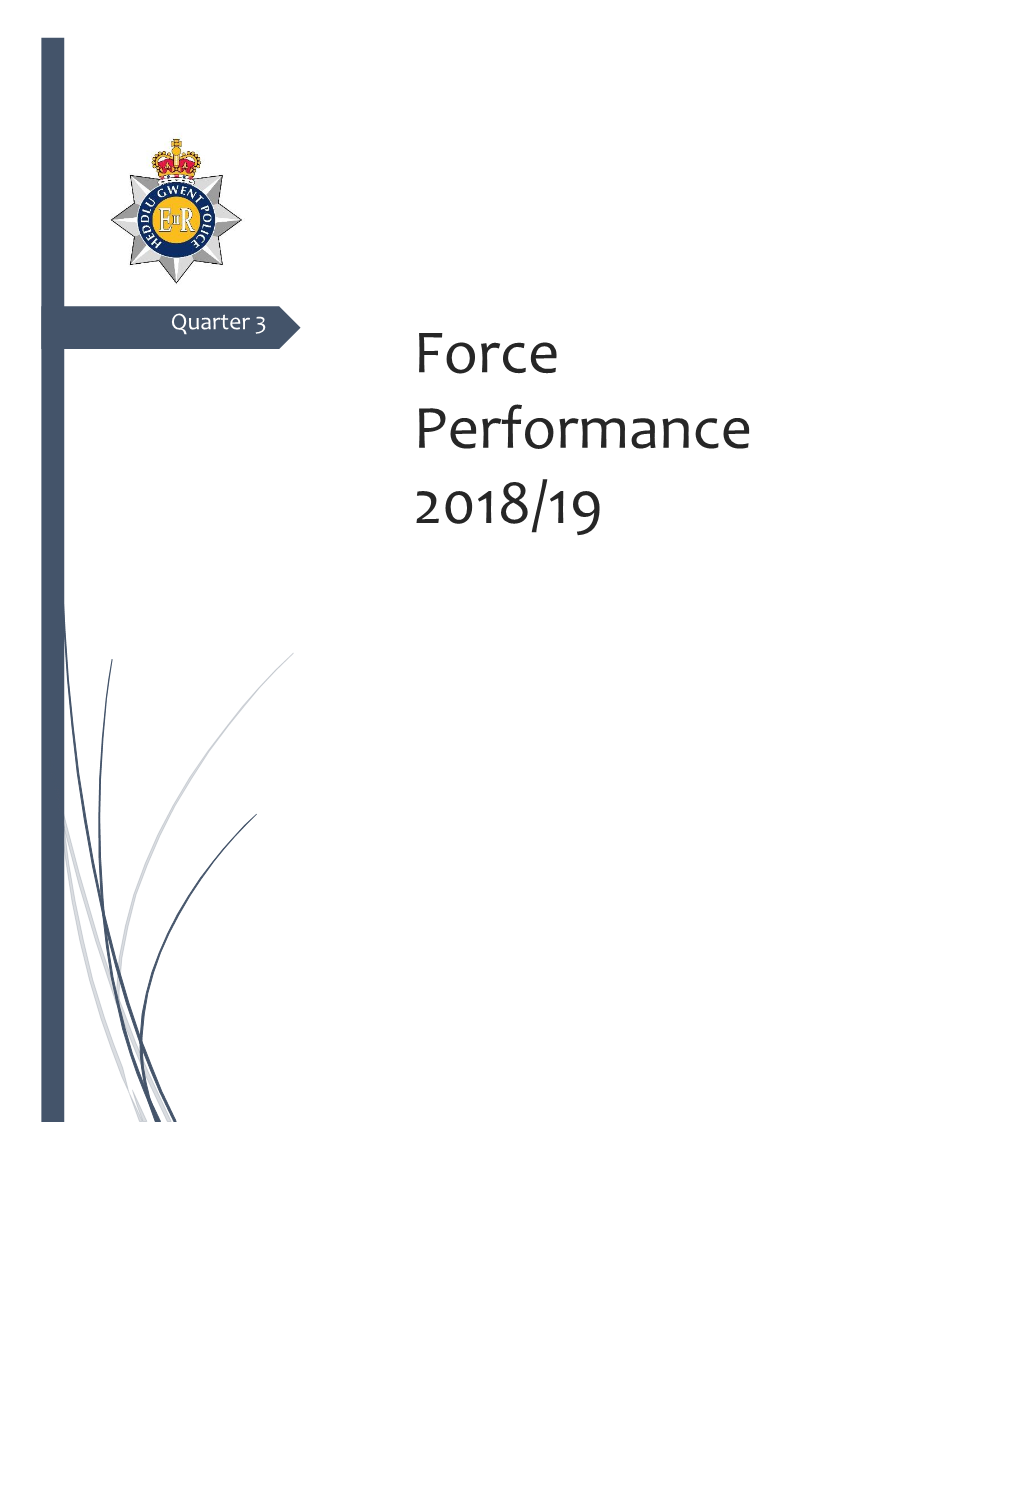 Organisational Performance Report Against the Police and Crime Plan